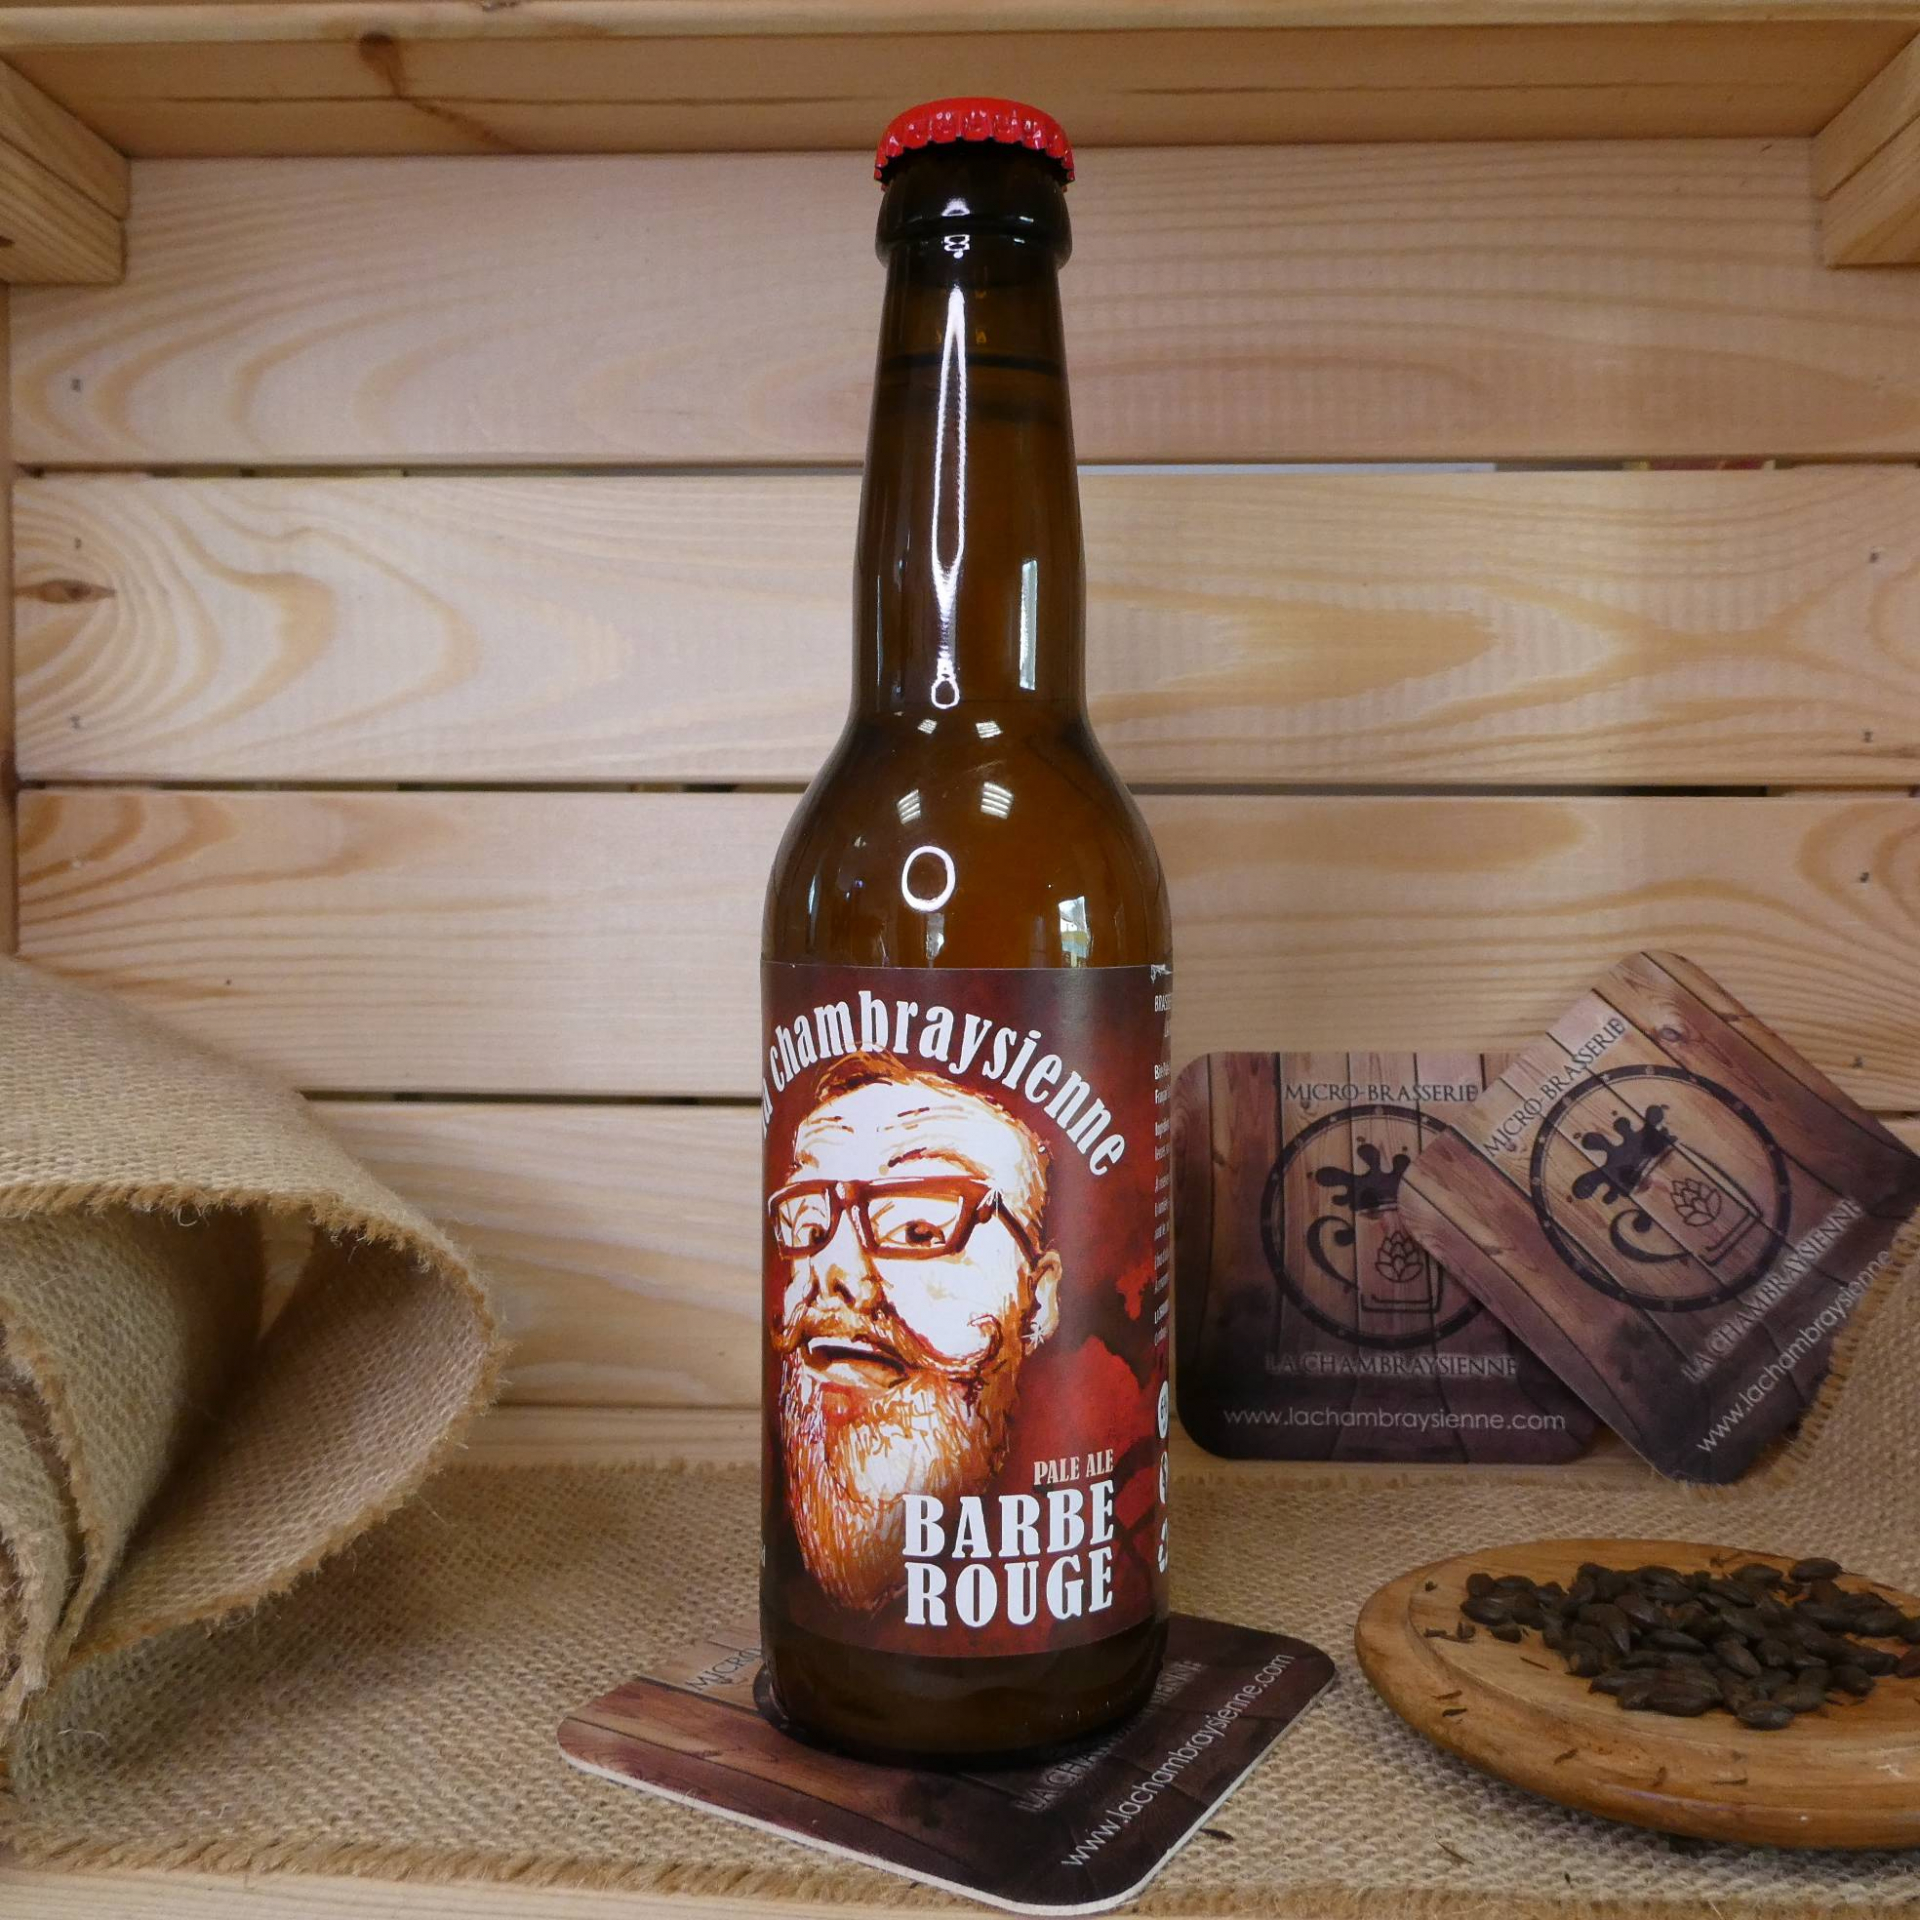 Bière "Barbe rouge"